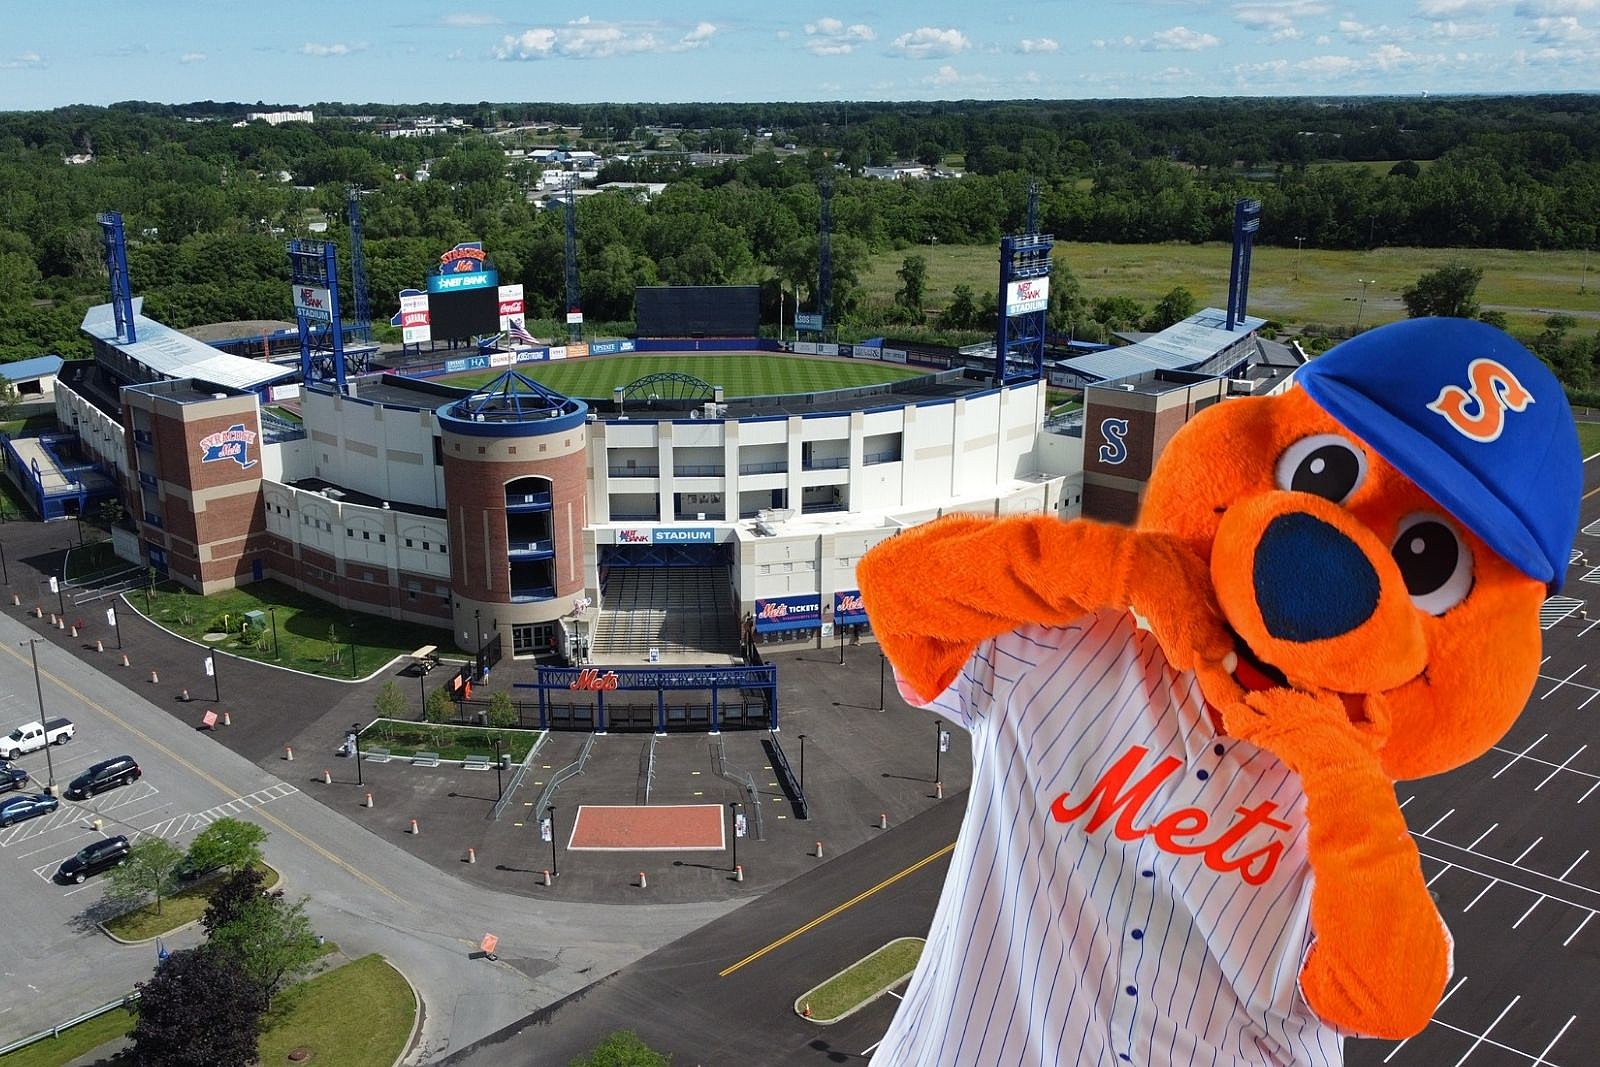 Syracuse Mets - It's Scooch Sunday! Do you have any